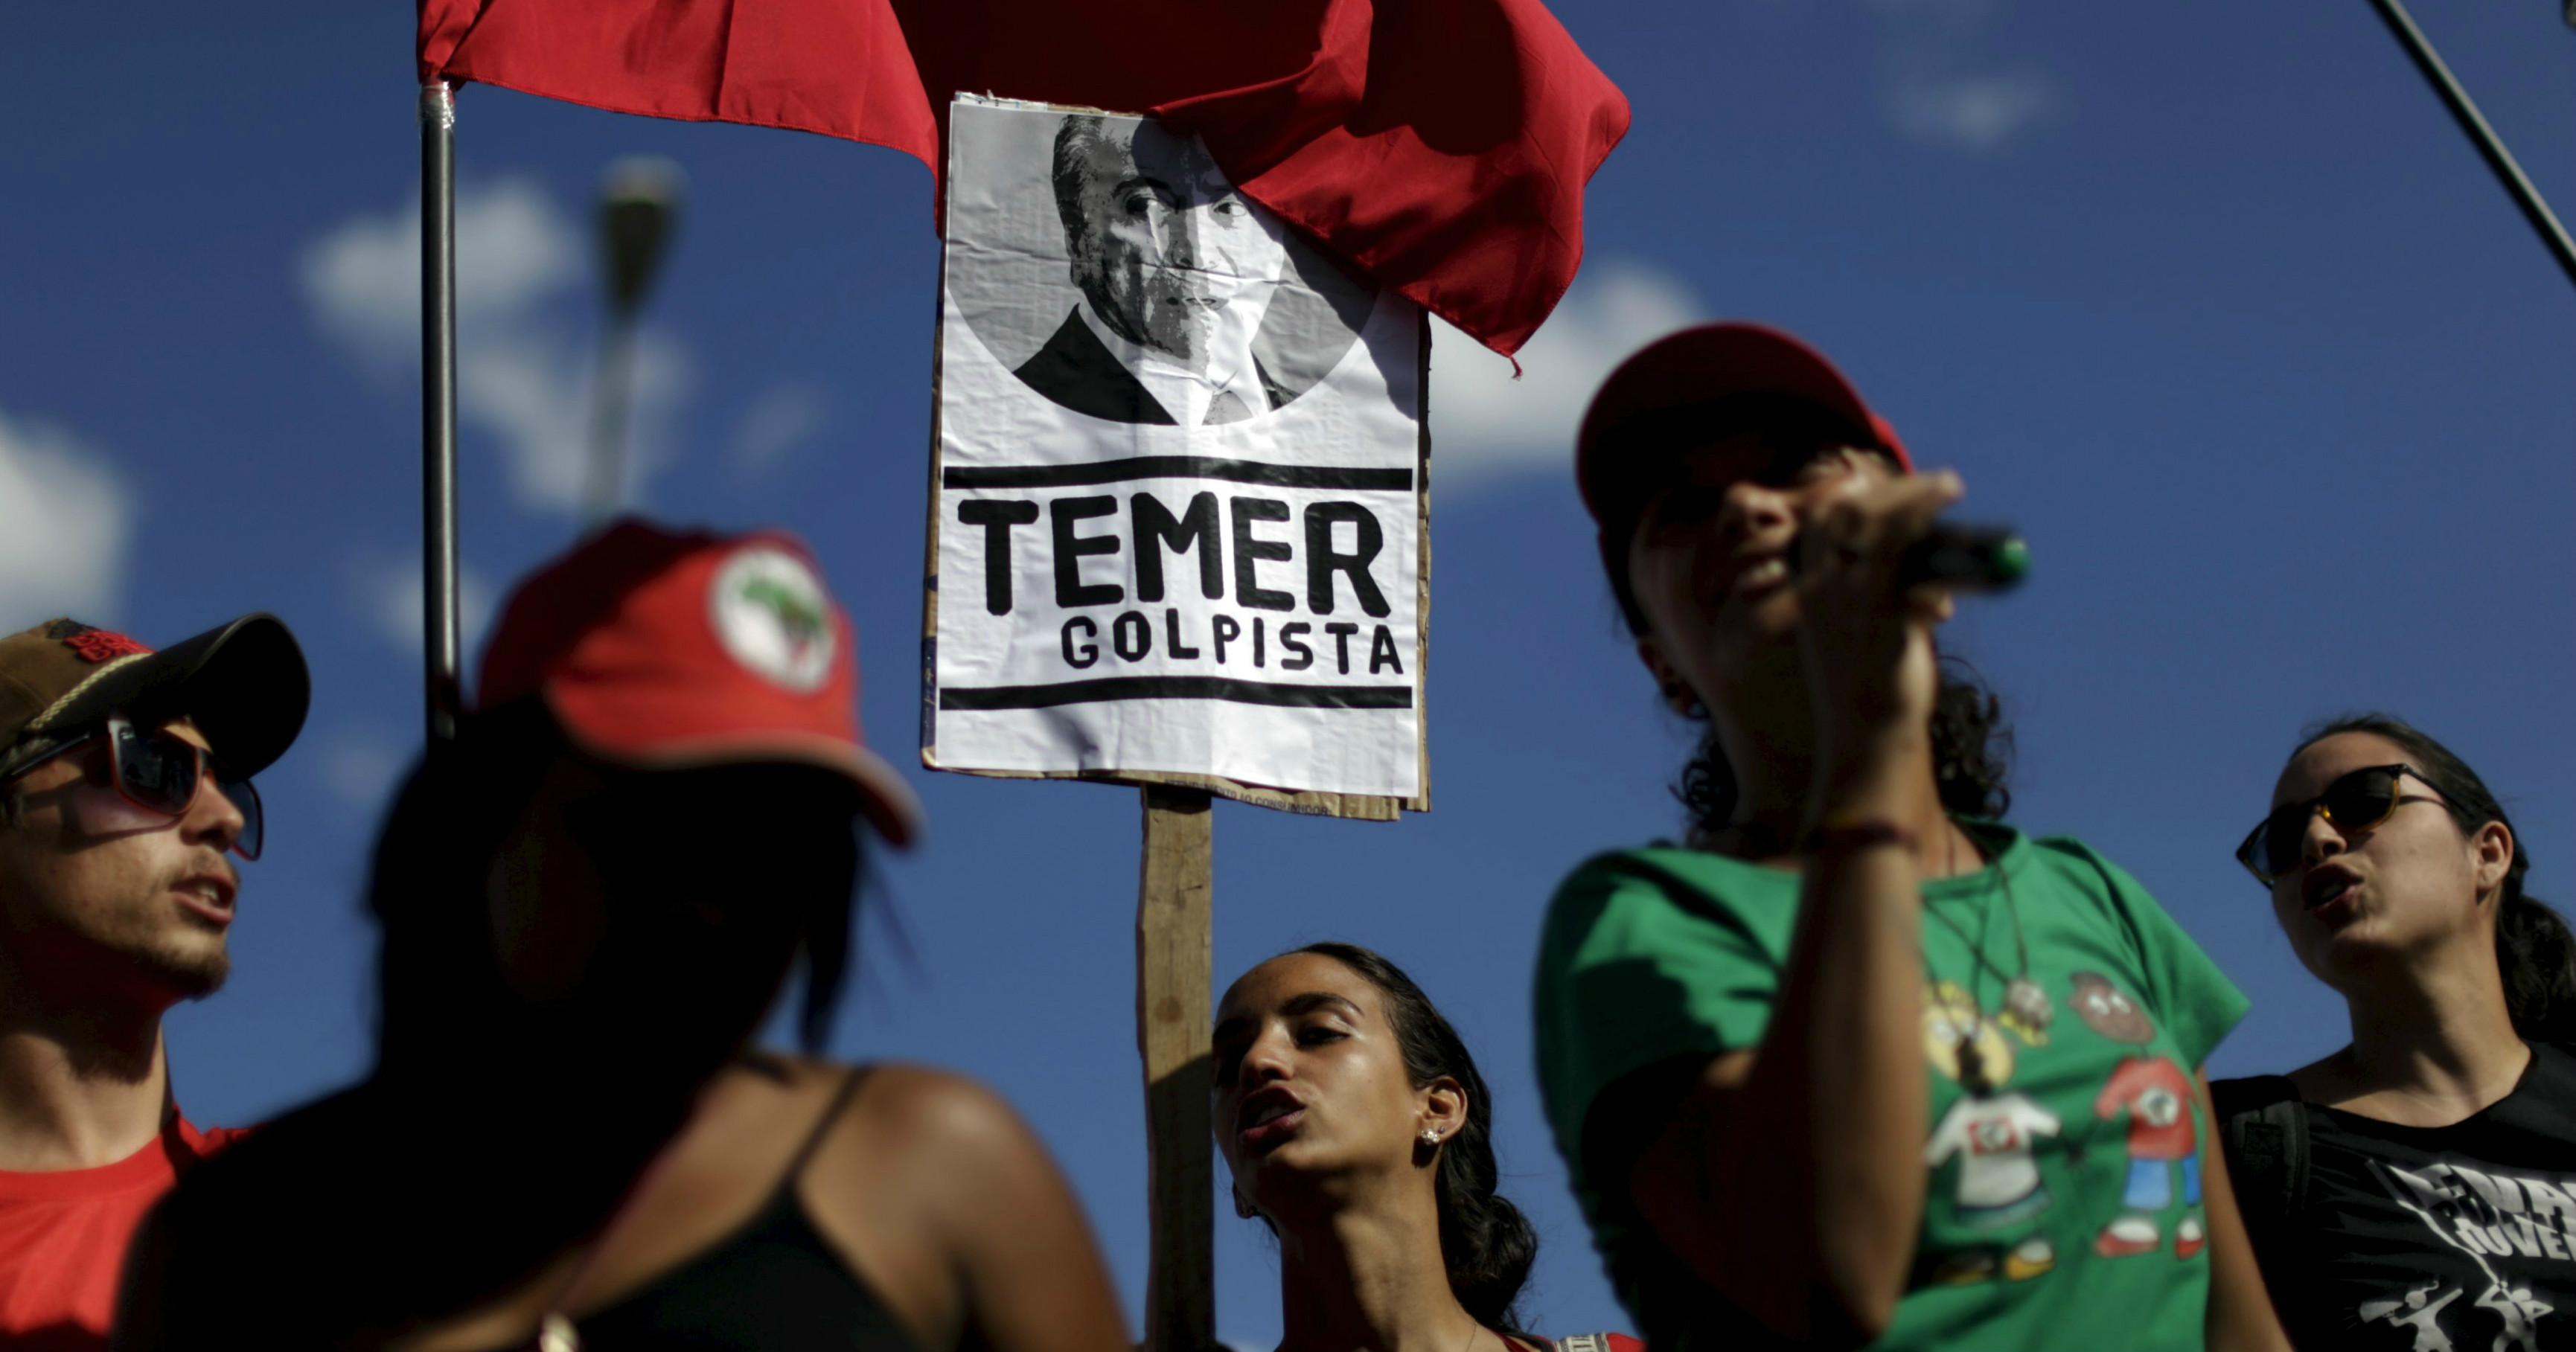 Members of social movements hold signs during a protest against Brazil's Vice President Michel Temer in front of Jaburu Palace in Brasilia, Brazil